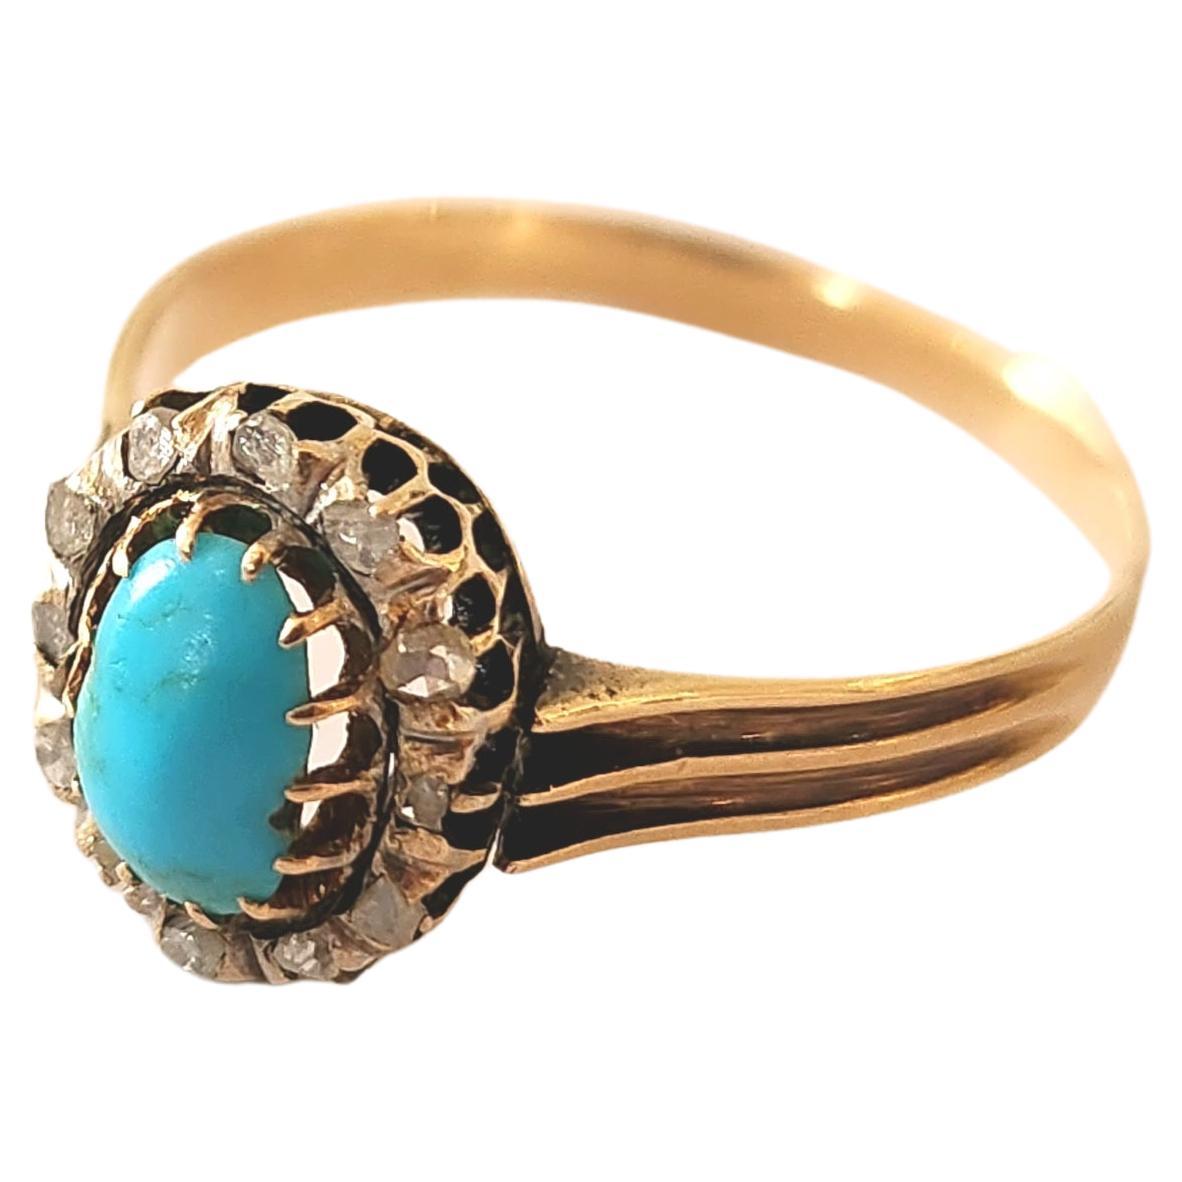 Antique russian turrquoise ring centered with light blue oval turquoise flanked with little rose cut diamonds in detailed work on ring sides ring head diameter 10.30mm ring was made in st petersburg russia 1870/1890.c during the imperial russian era